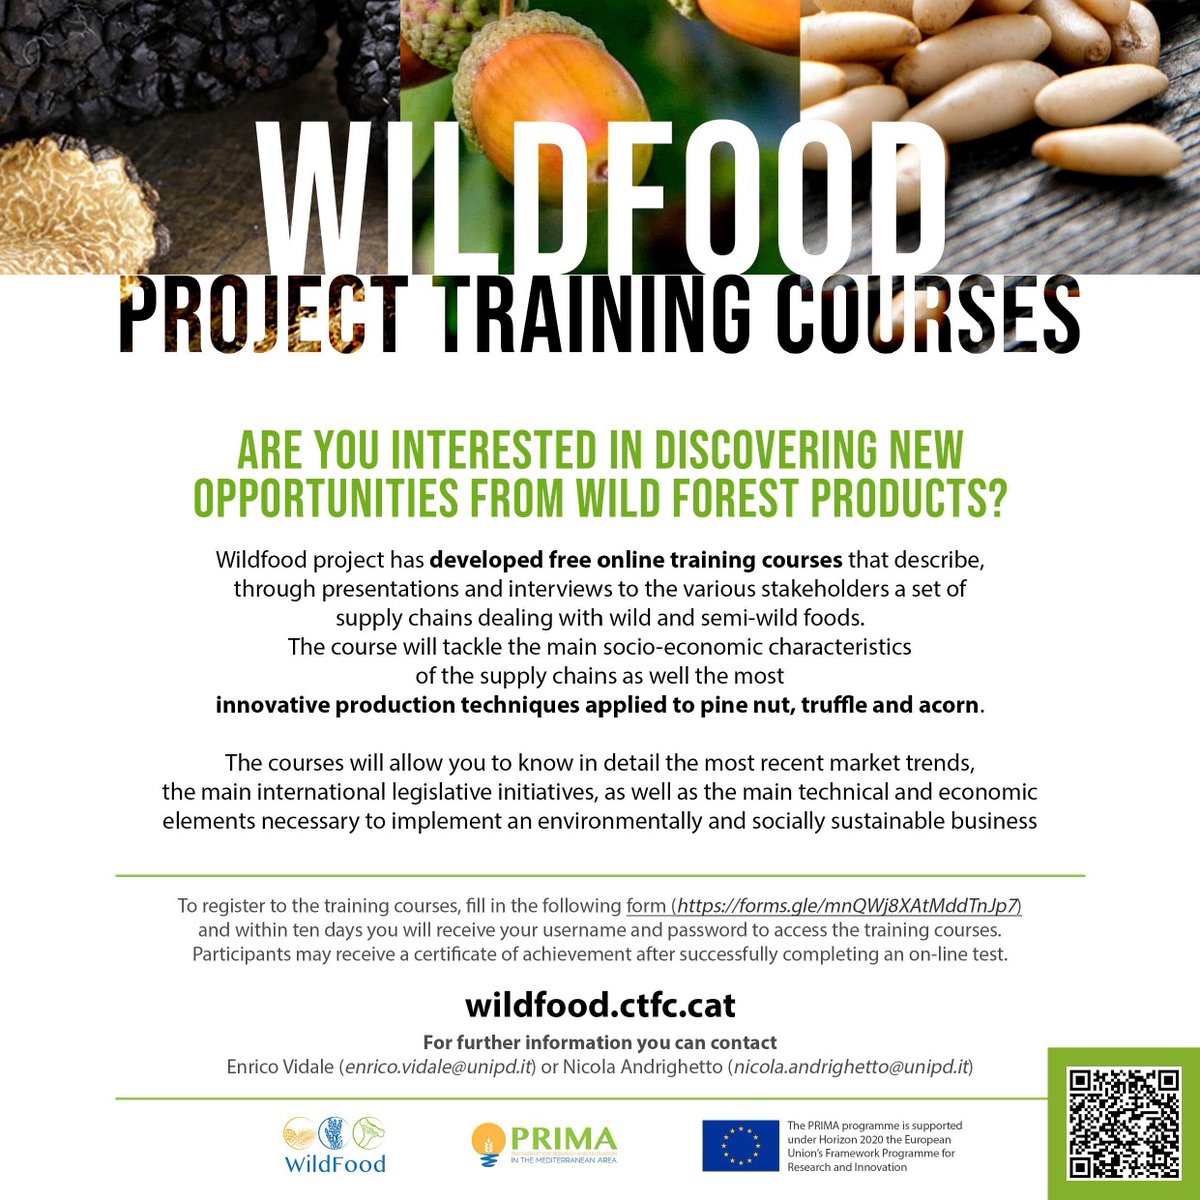 ⏰🏃‍♂️ You are still on time to register to our Training Courses! The regisration deadline is today. Don't miss it!

Register now: docs.google.com/forms/d/e/1FAI…

#traininigcourse #wildfoodproject #wildfoodprima